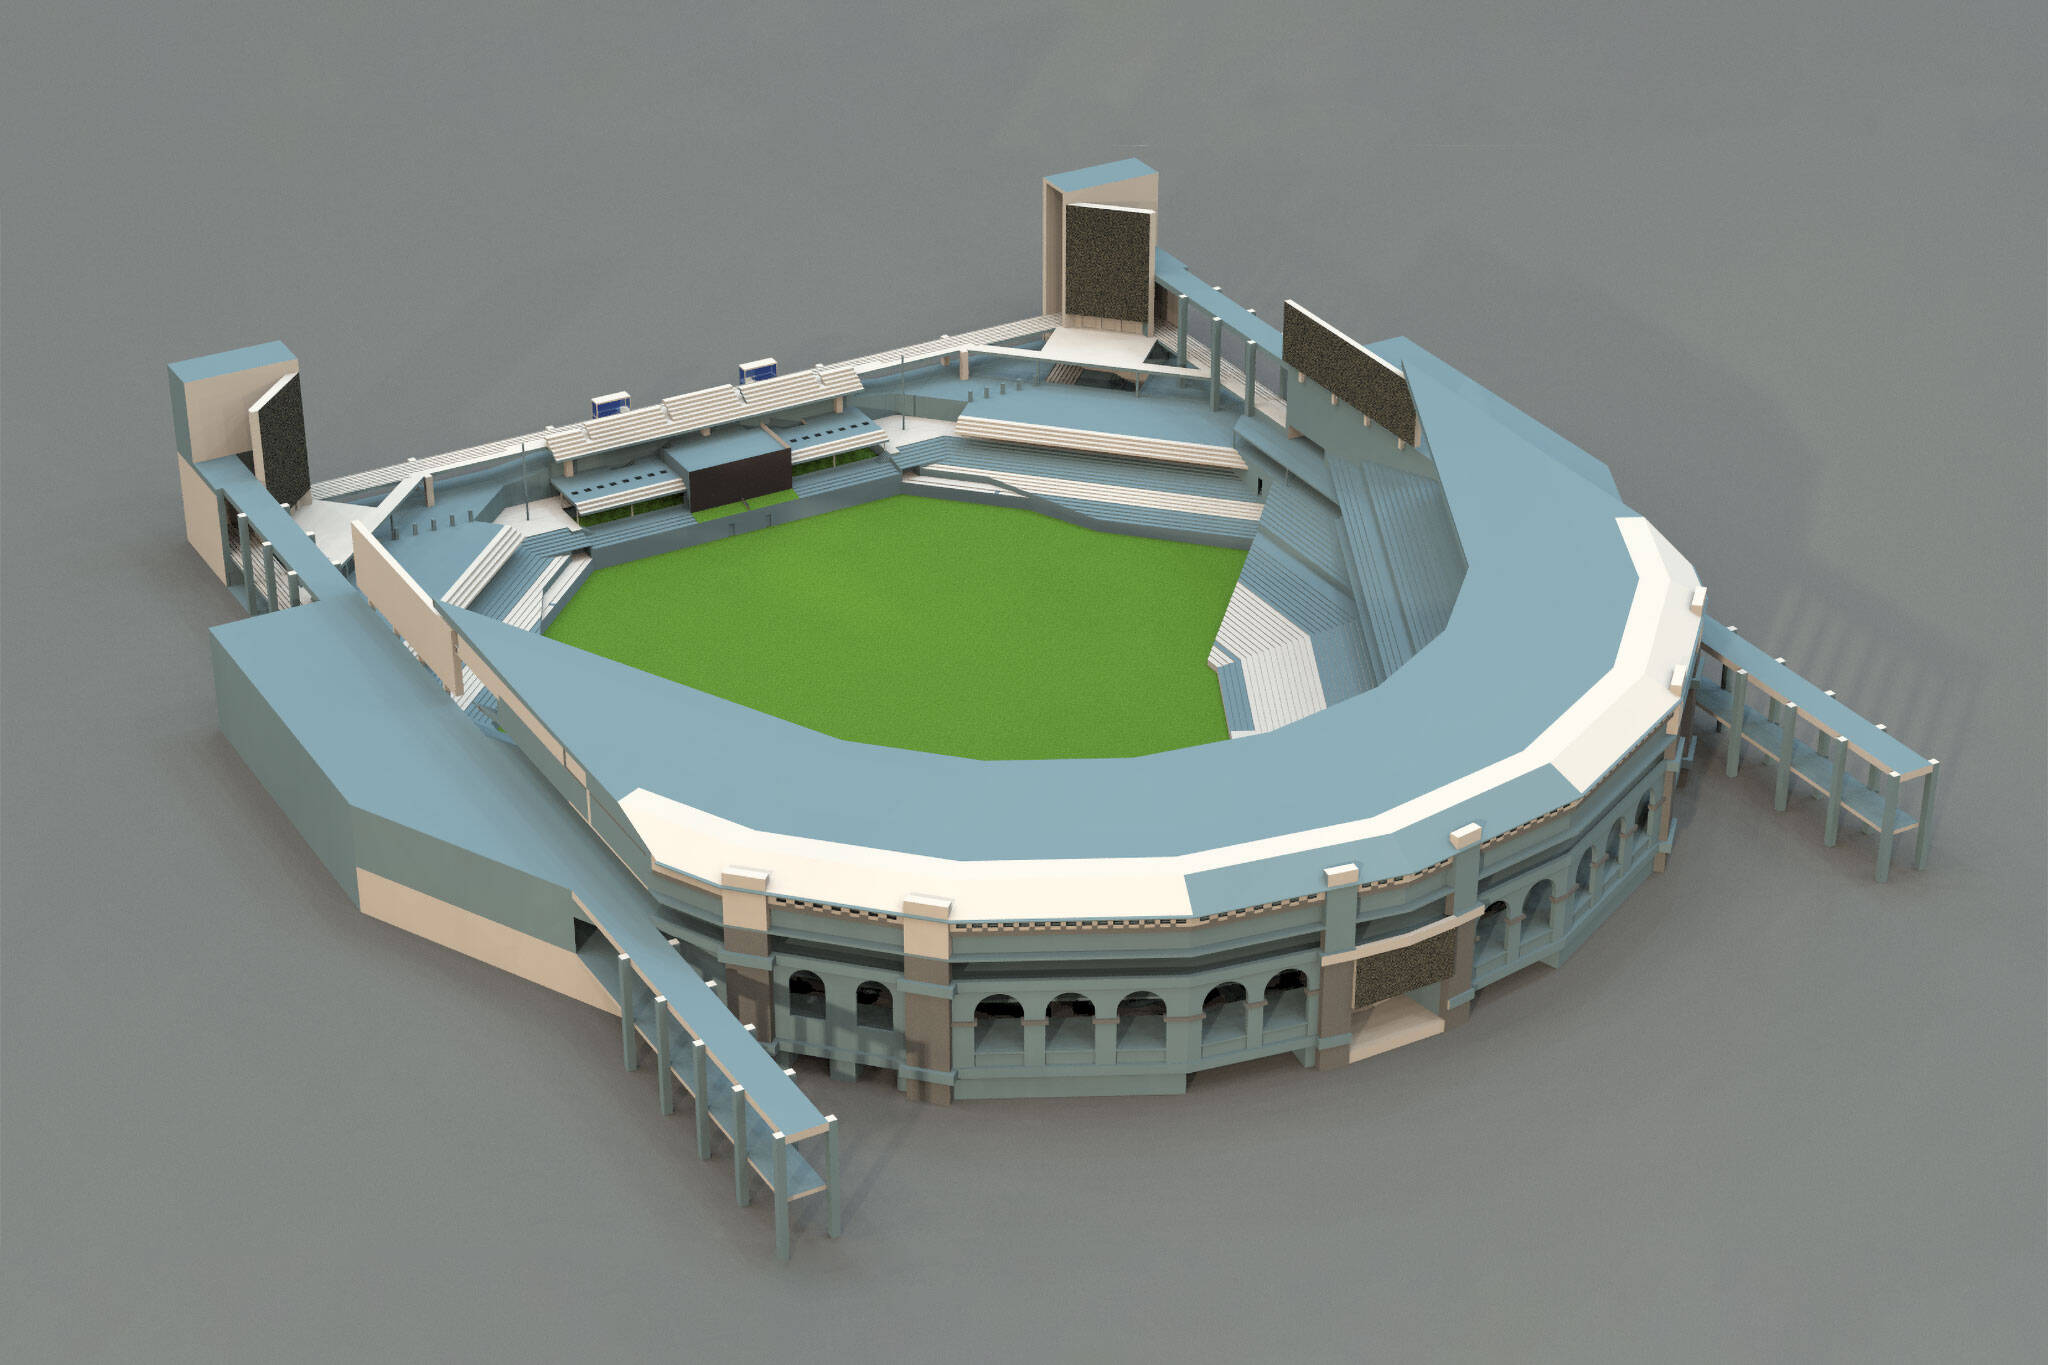 Fans design concept ballpark to replace the Rogers Centre in Toronto